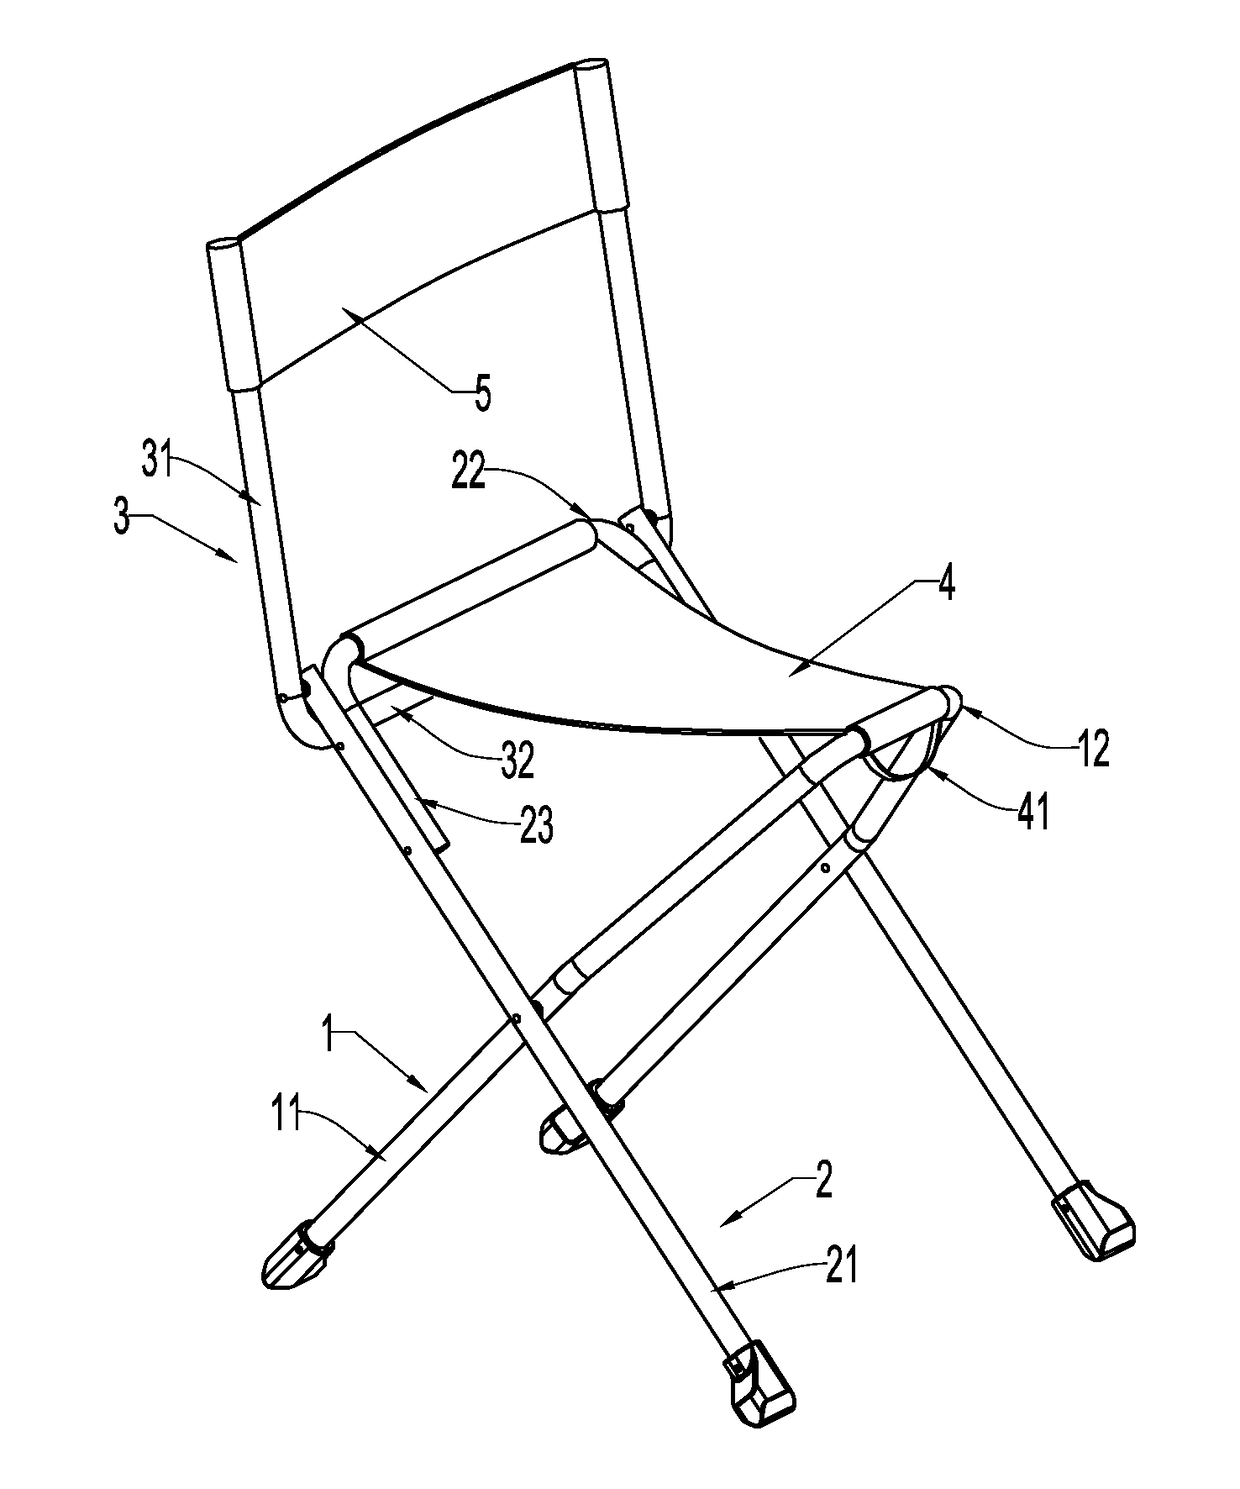 Folding chair with back rest